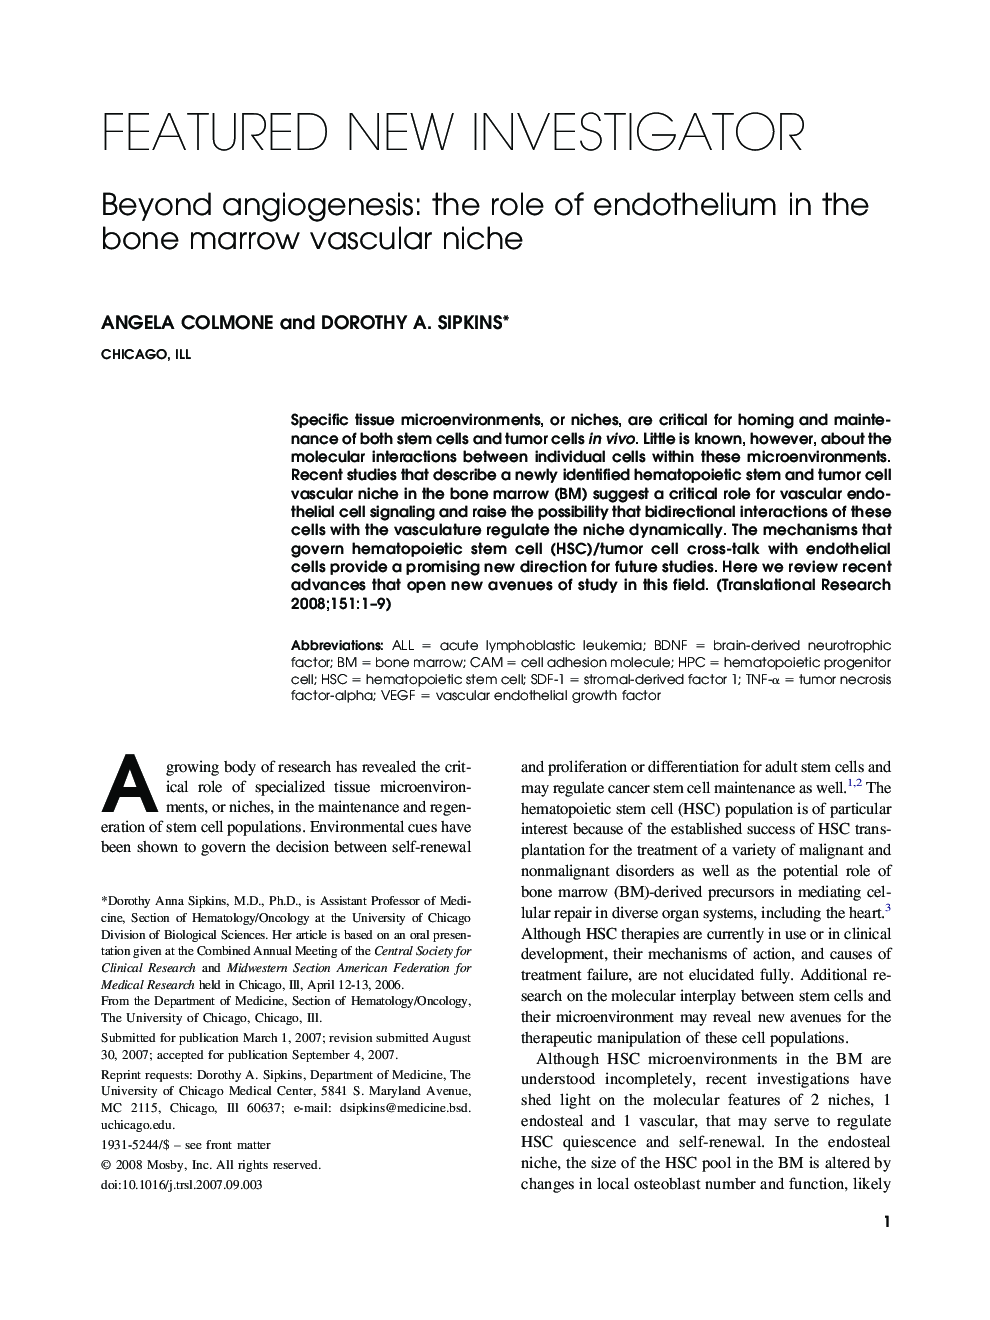 Beyond angiogenesis: the role of endothelium in the bone marrow vascular niche